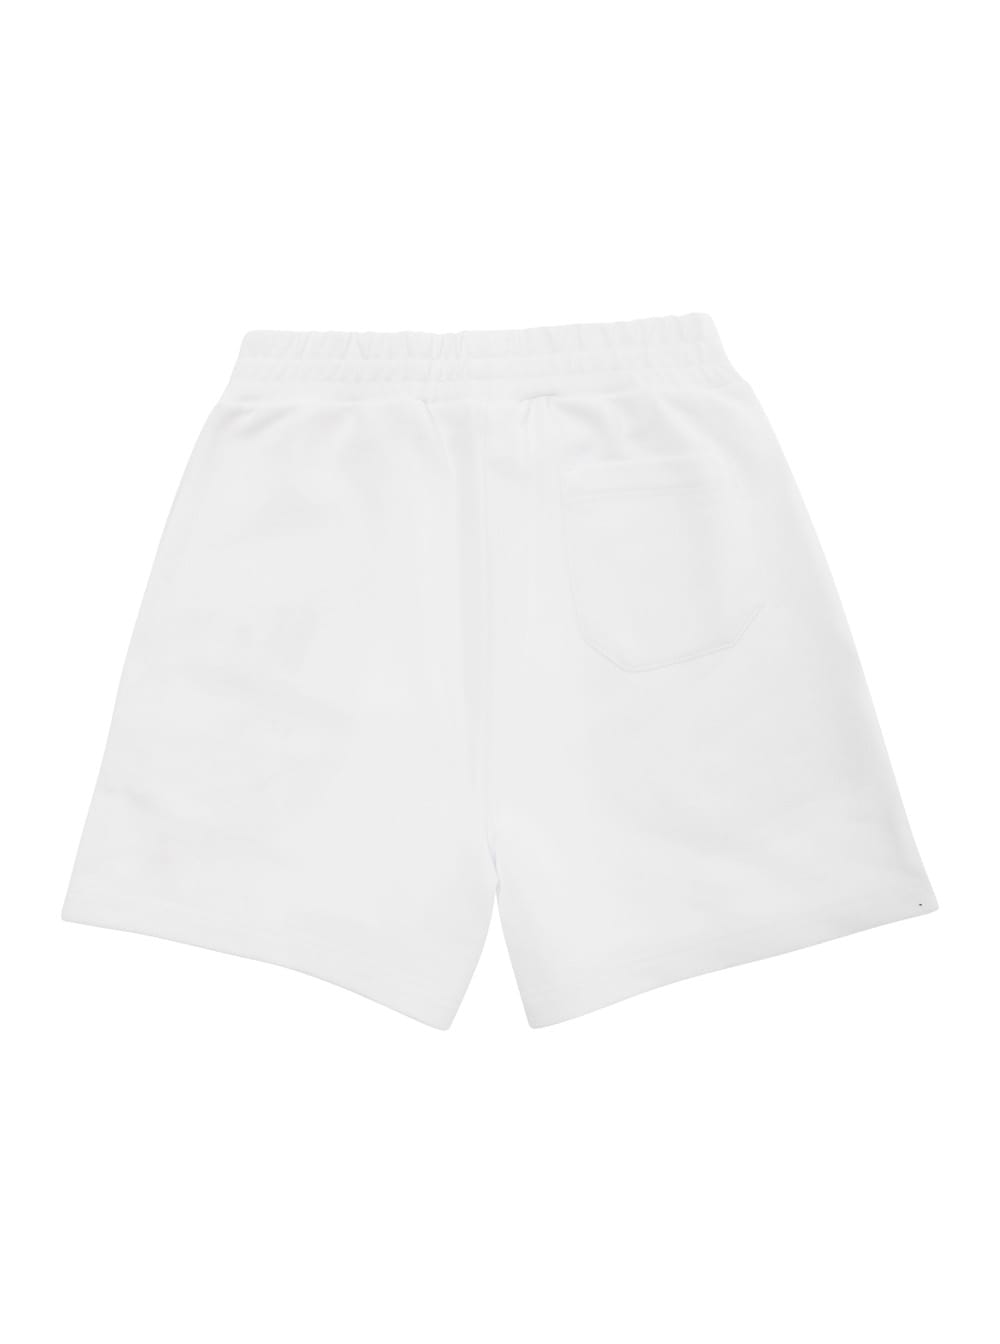 Shop Golden Goose Star / Girls Fleece Shorts / Small Star Glitter Printed Include Cod Gyp In White